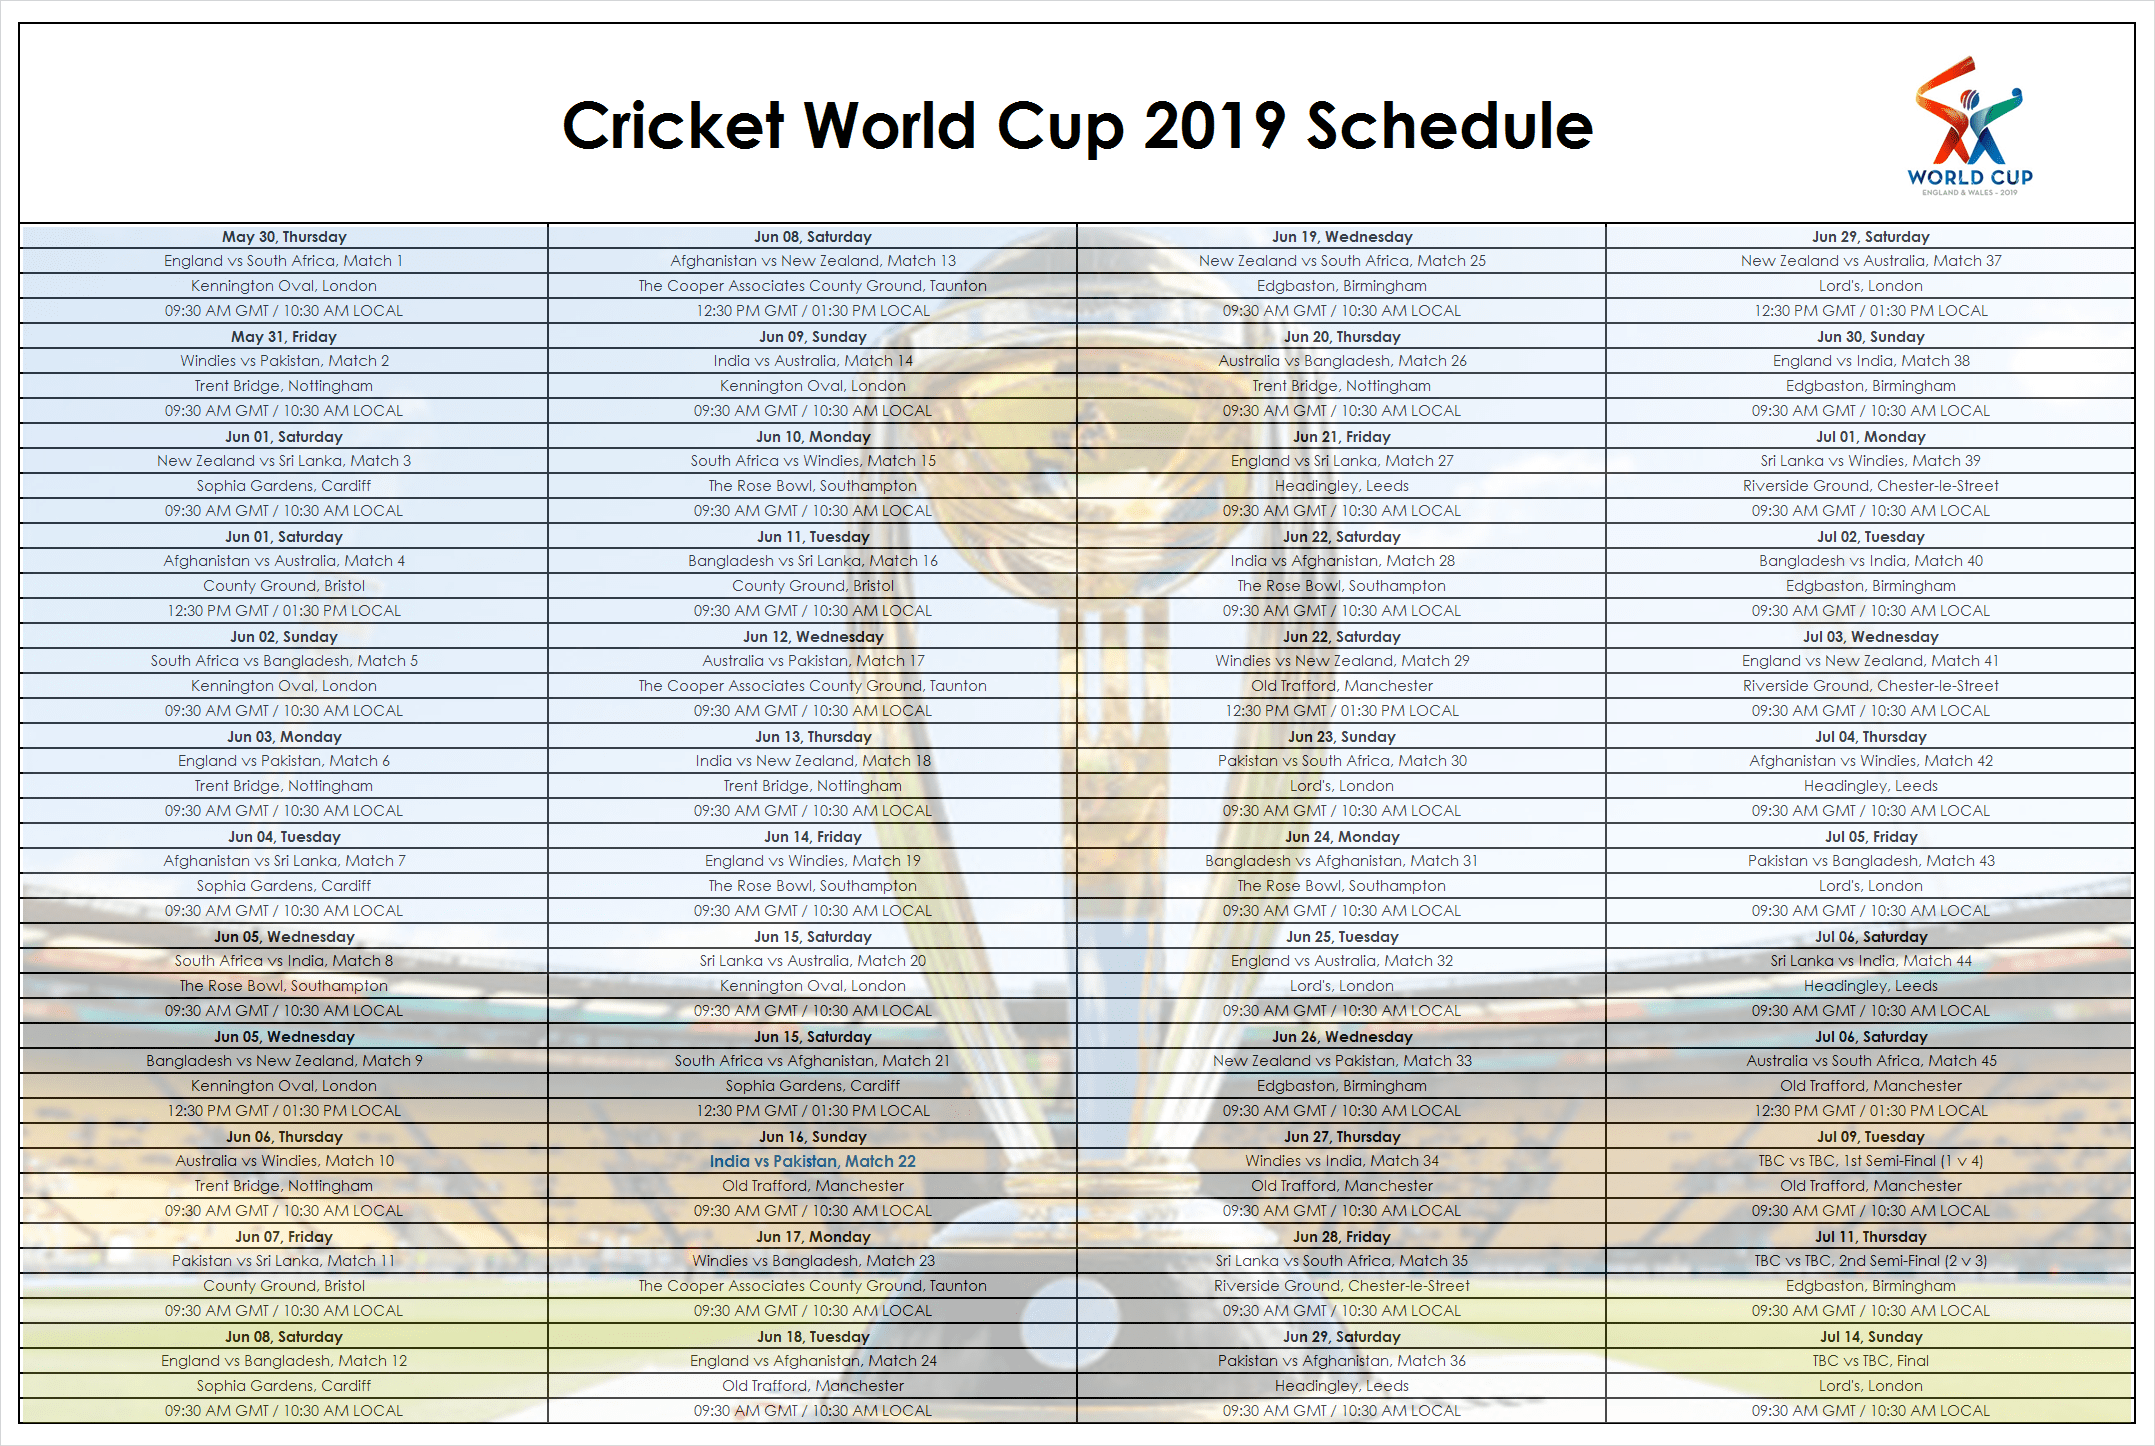 World Cup 2019 Schedule Image, Picture, Photo and Wallpaper. ICC